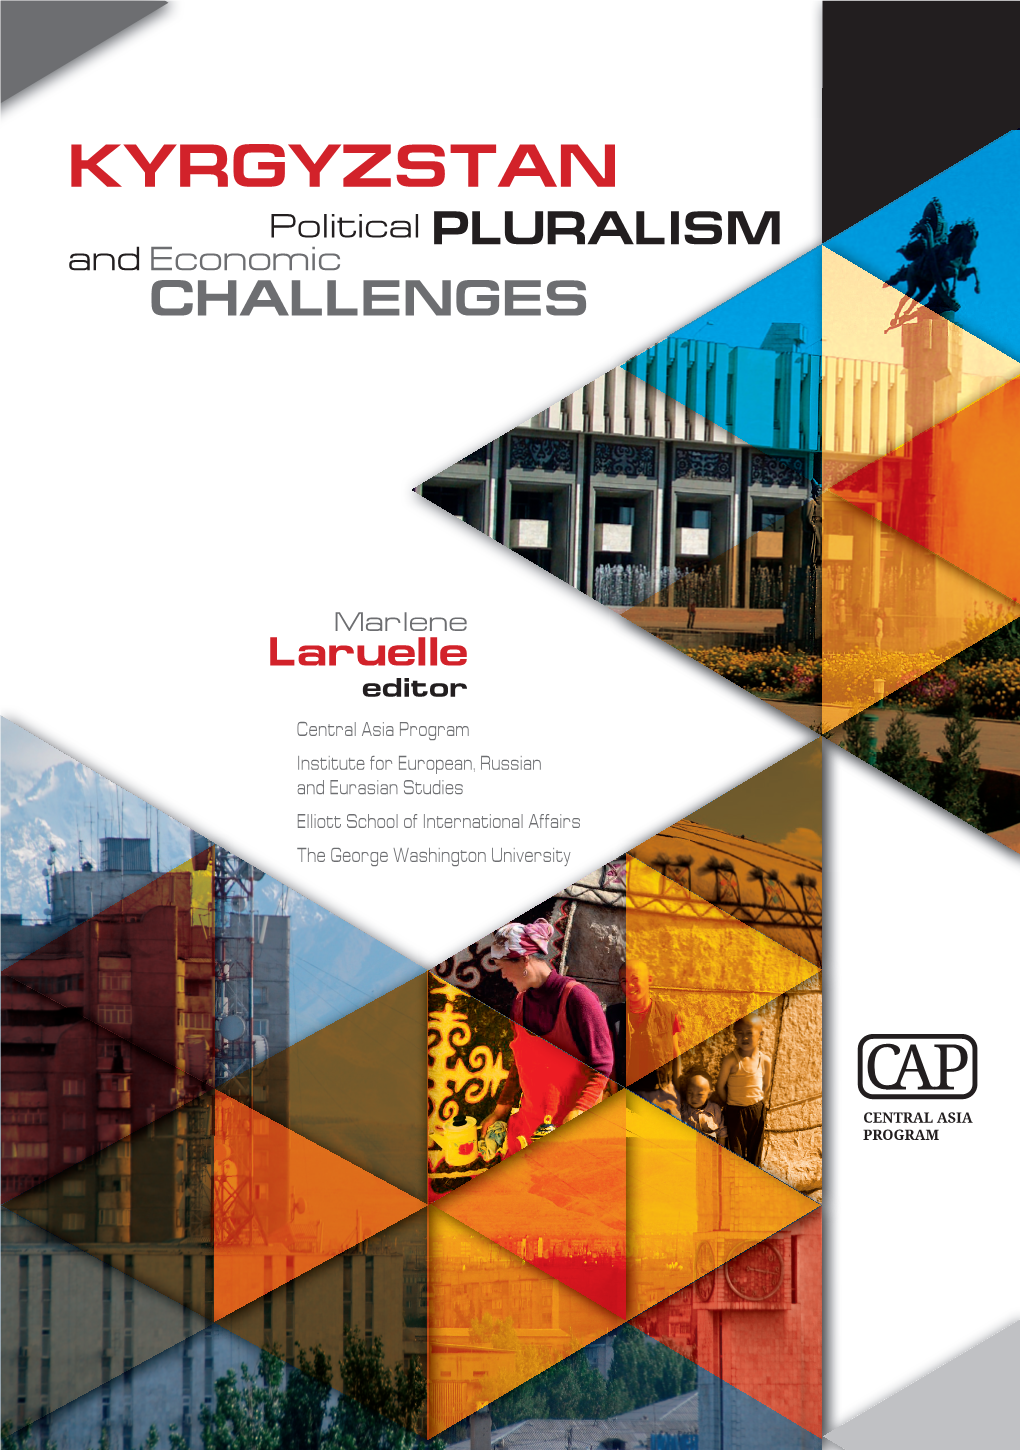 KYRGYZSTAN Political PLURALISM and Economic CHALLENGES